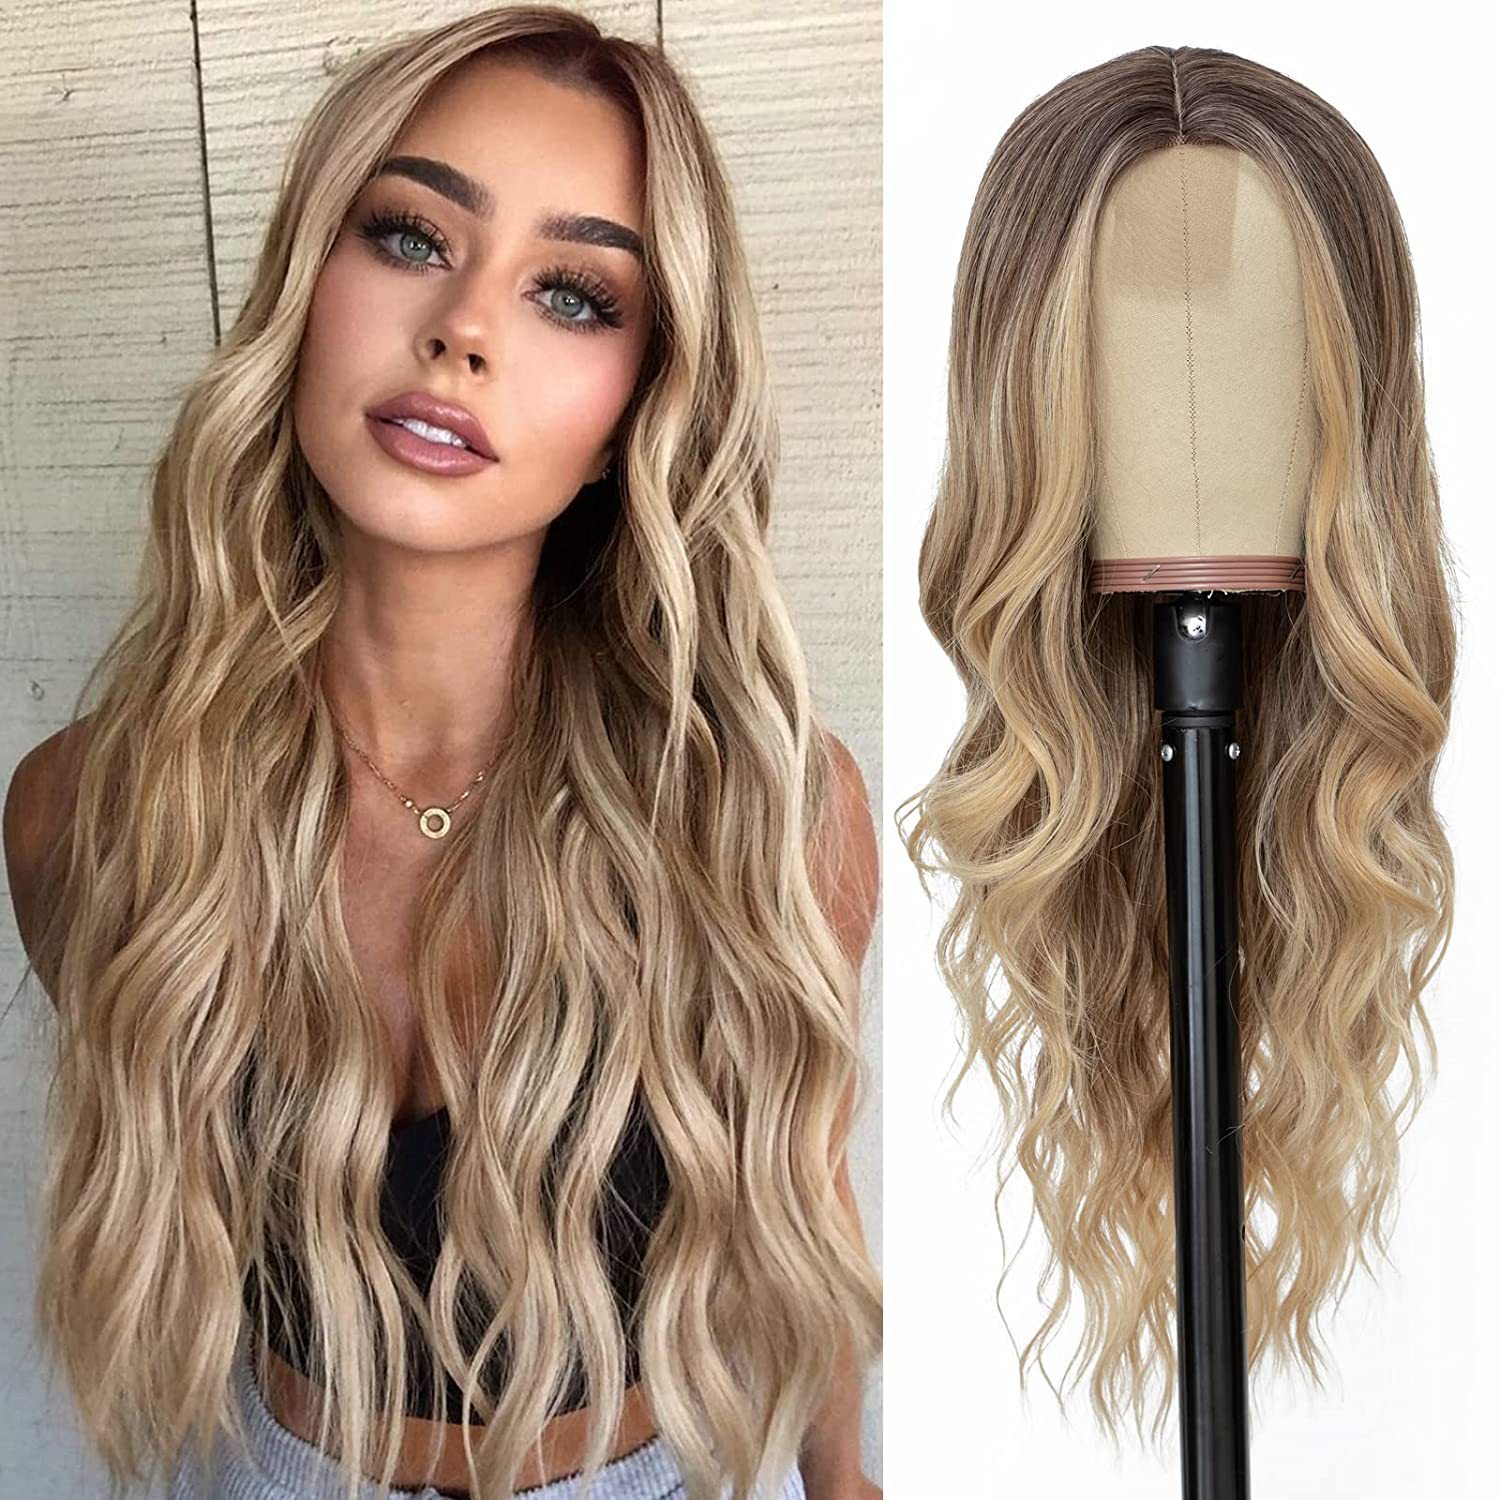 Großhandelspreise Premier Highlight Color Virgin Hair Natural Wave 360 Lace Wig Human Hair Frontal Wig With Baby Hair Fast Ship